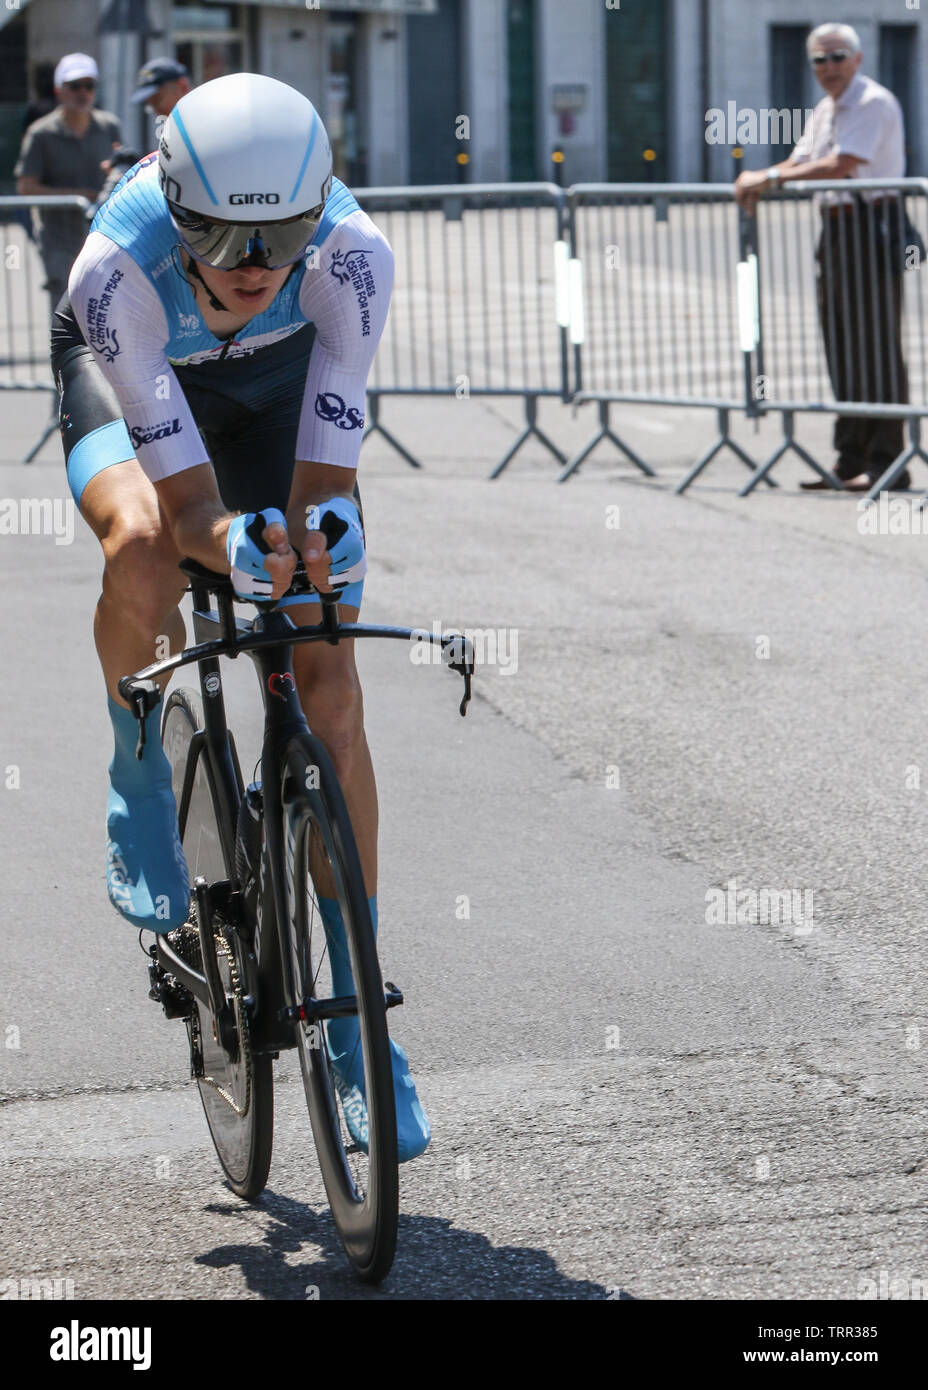 Pro Cyclist competing at the final stage 21 Time Trial of the Giro d'Italia 2019 in Verona Italy Fabrizio Malisan Photography Stock Photo